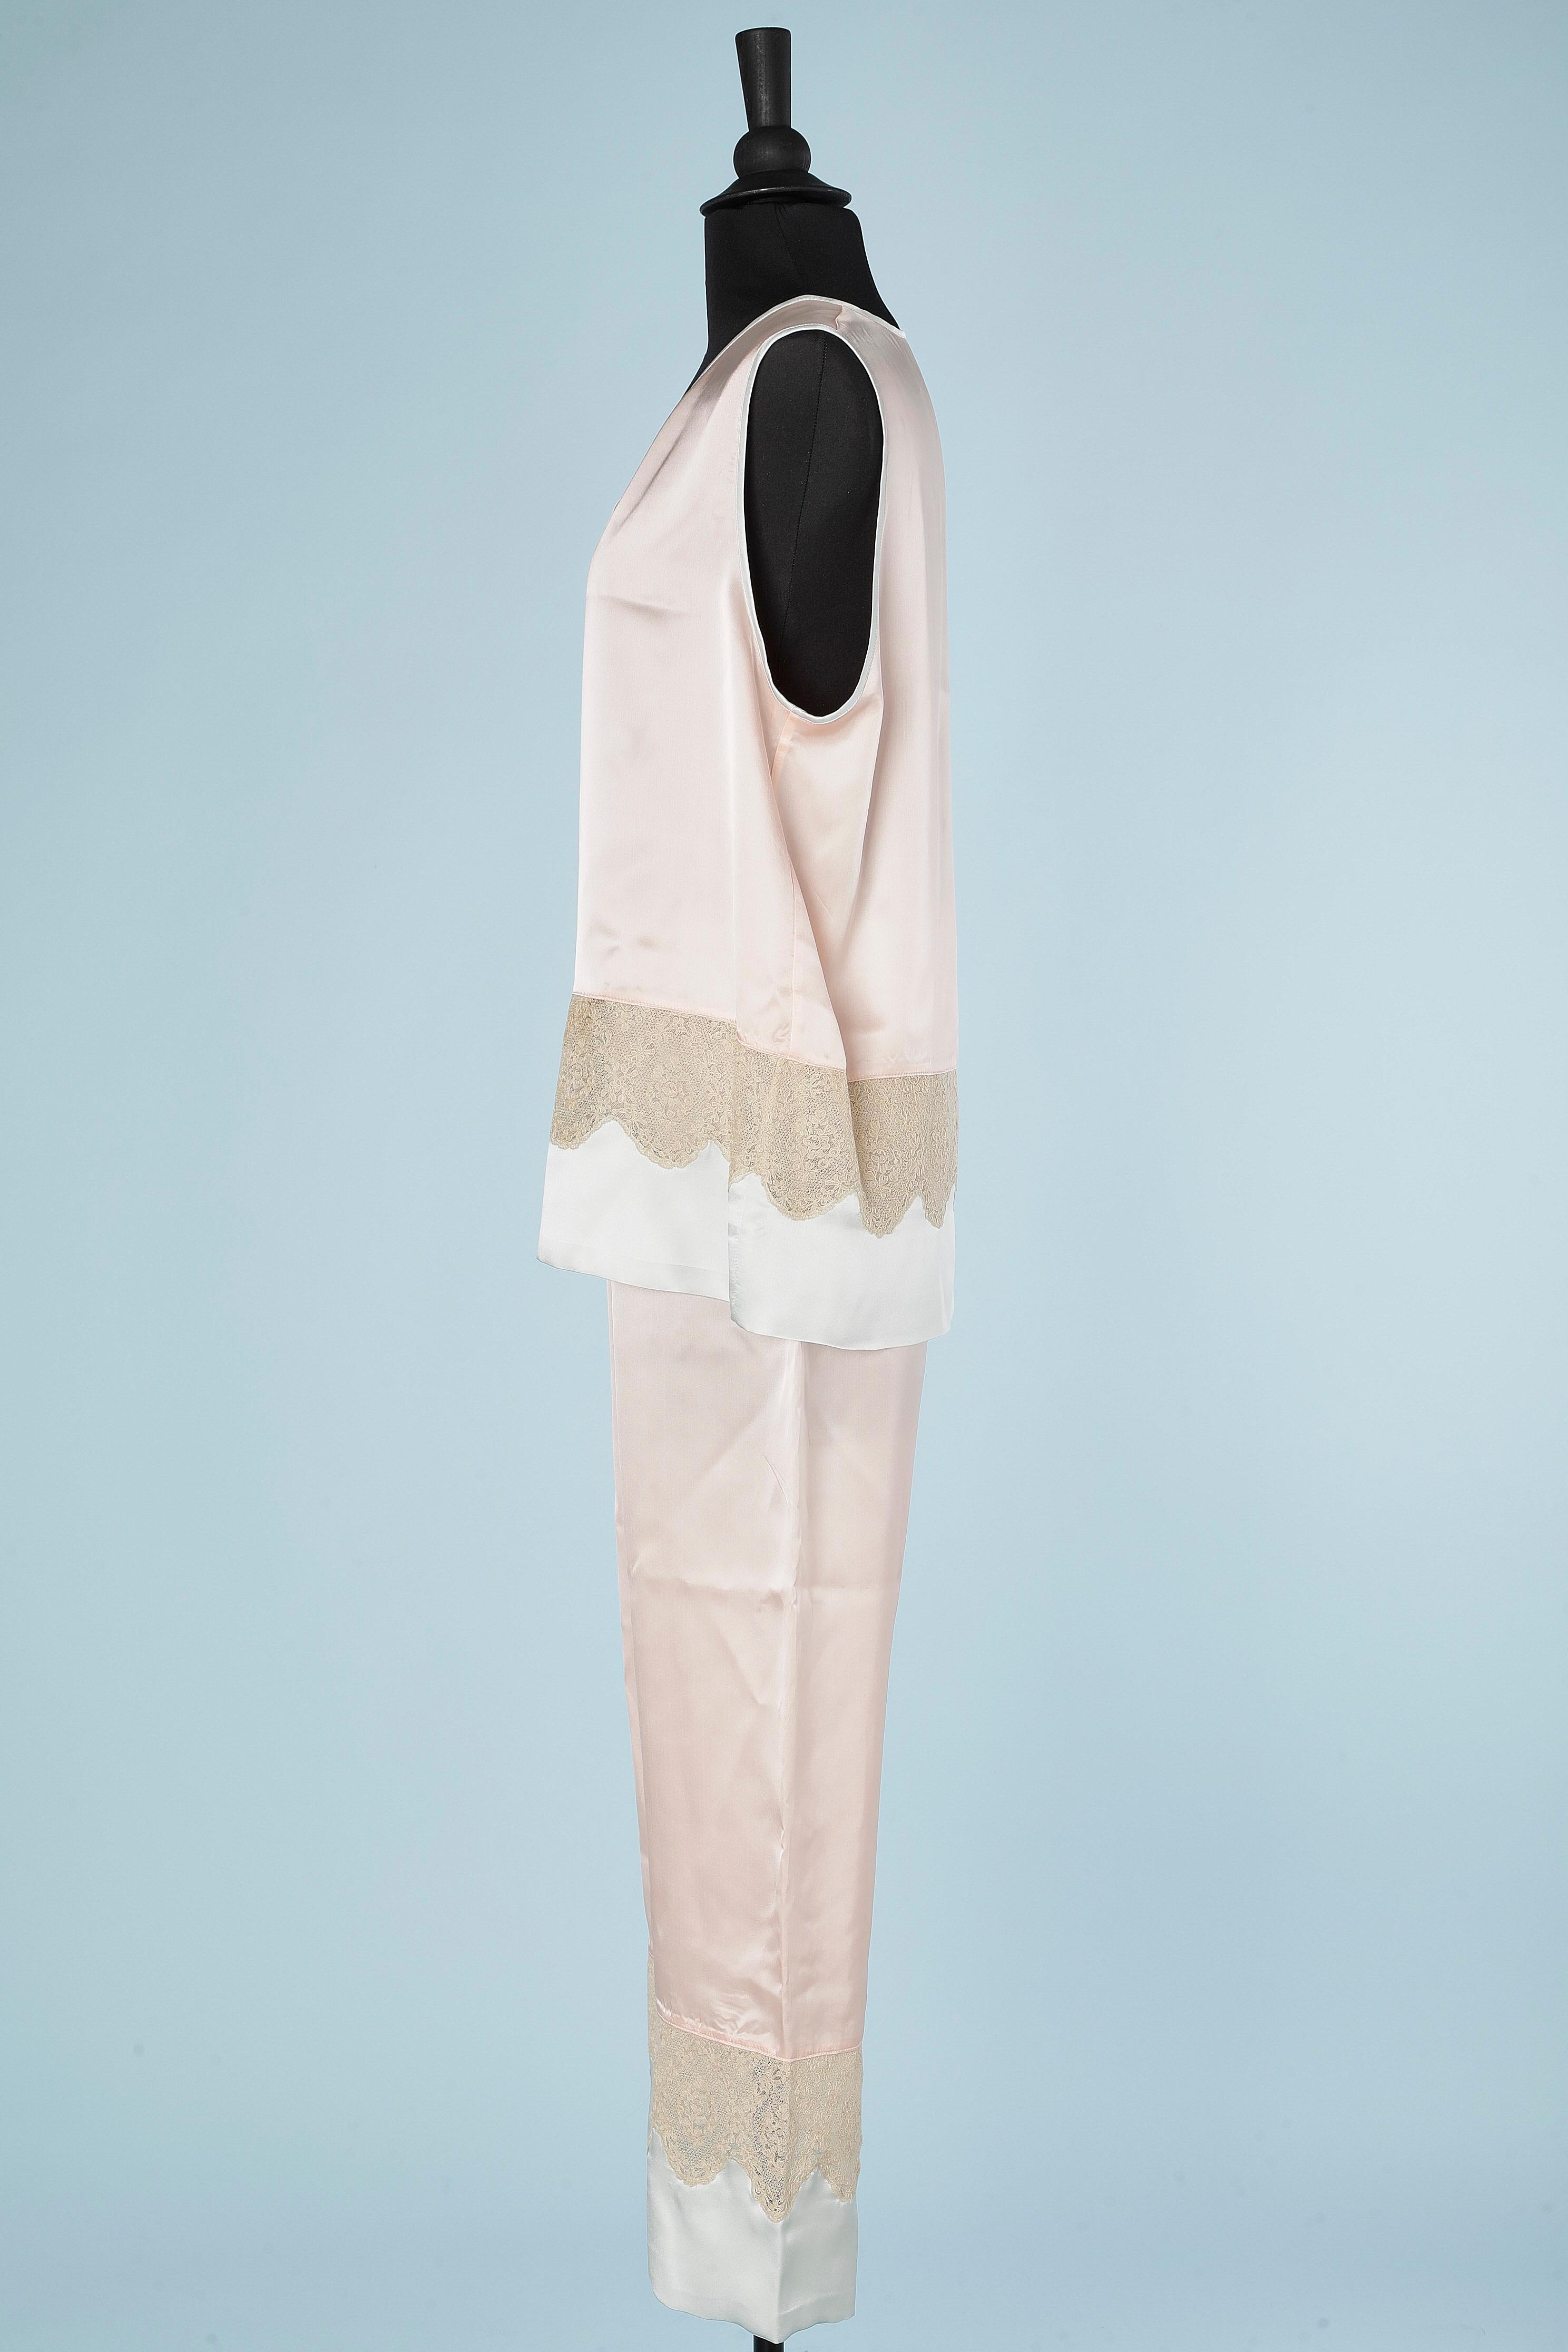 Robe and pyjamas in pastel silk satin and lace appliqué  Circa 1930 For Sale 2